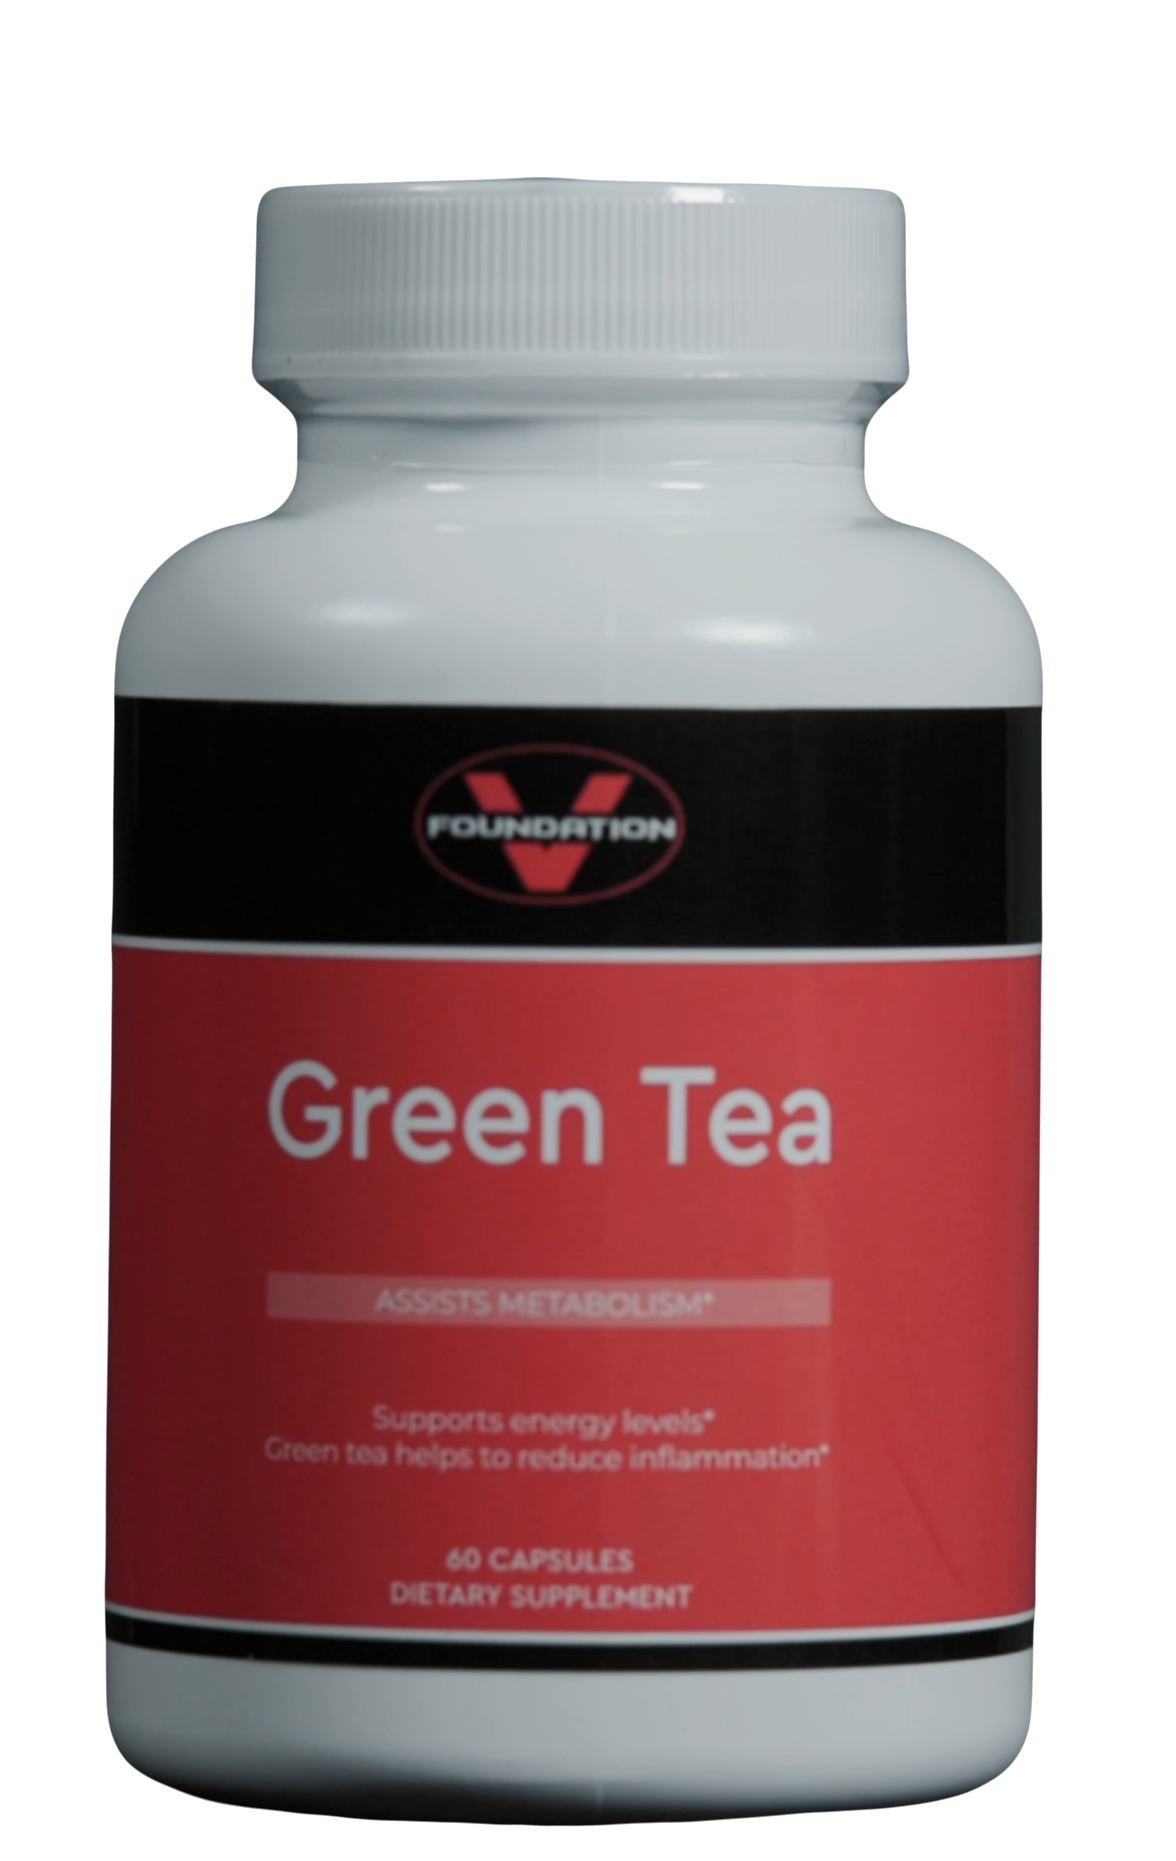 green tea assists in metabolism it is 60 capsules. It assists in an energy boost in a convenient capsule form. All of foundation V supplements are of high quality